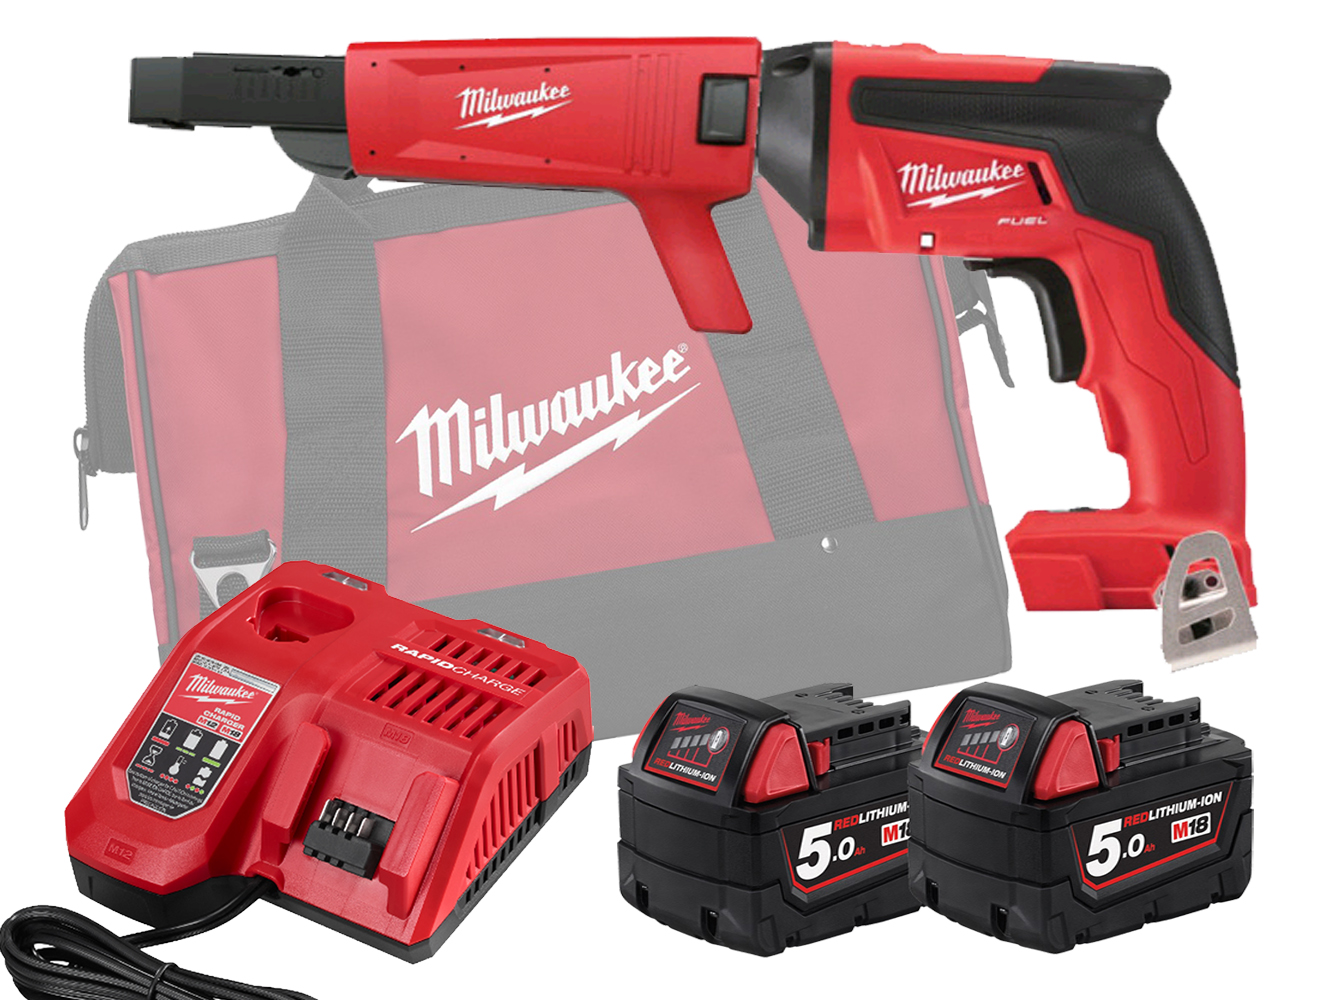 Milwaukee M18FSGC 18V Fuel Screw Gun With Collated Attachment - 5.0Ah Pack